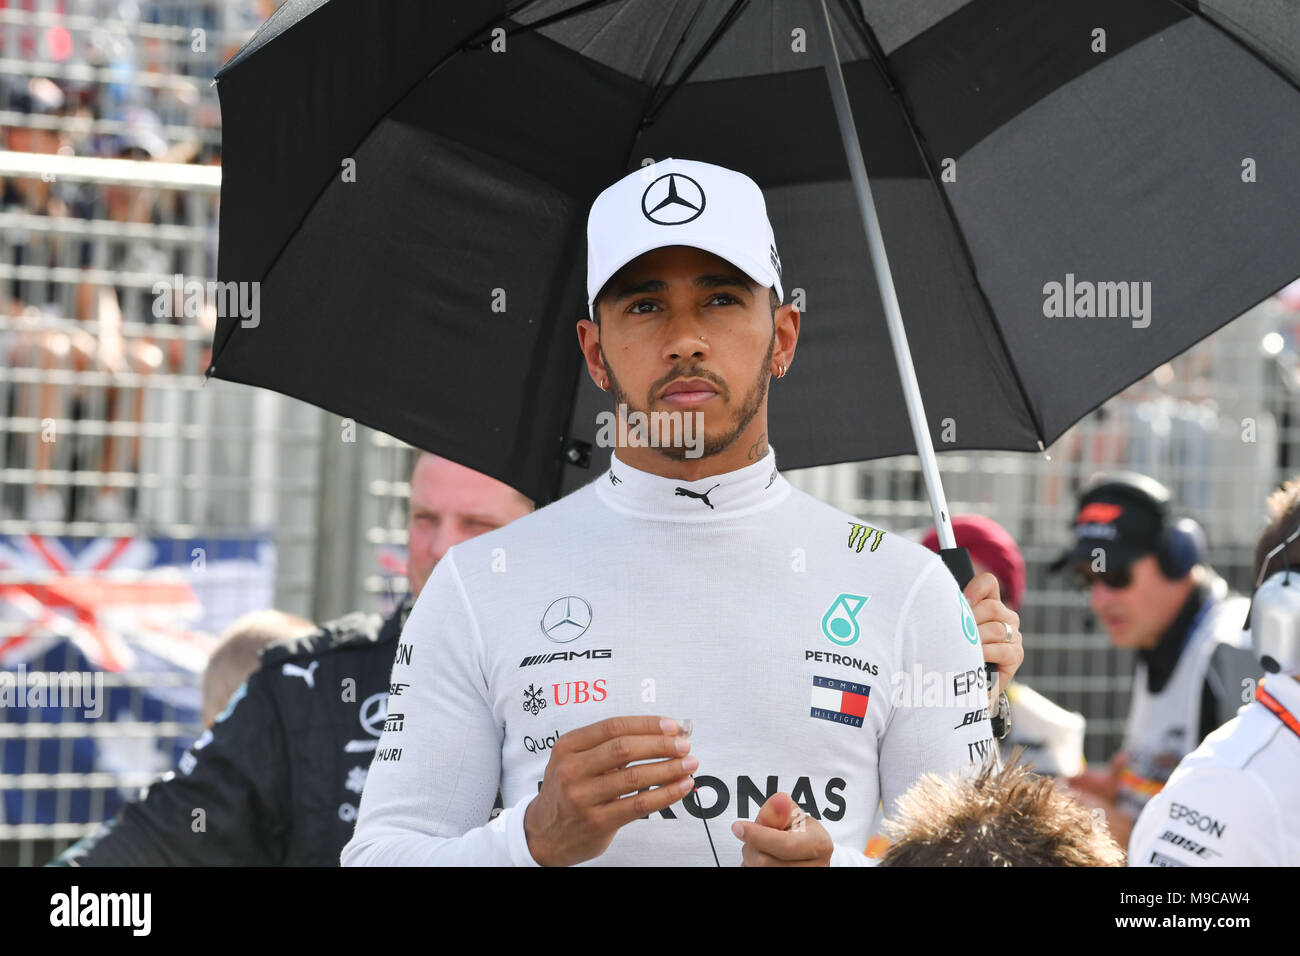 Albert Park, Melbourne, Australia. 25th Mar, 2018. Lewis Hamilton (GBR) #44 from the Mercedes AMG Petronas Motorsport team prepares to put on his race suit on the grid prior to the start of the 2018 Australian Formula One Grand Prix at Albert Park, Melbourne, Australia. Sydney Low/Cal Sport Media/Alamy Live News Stock Photo